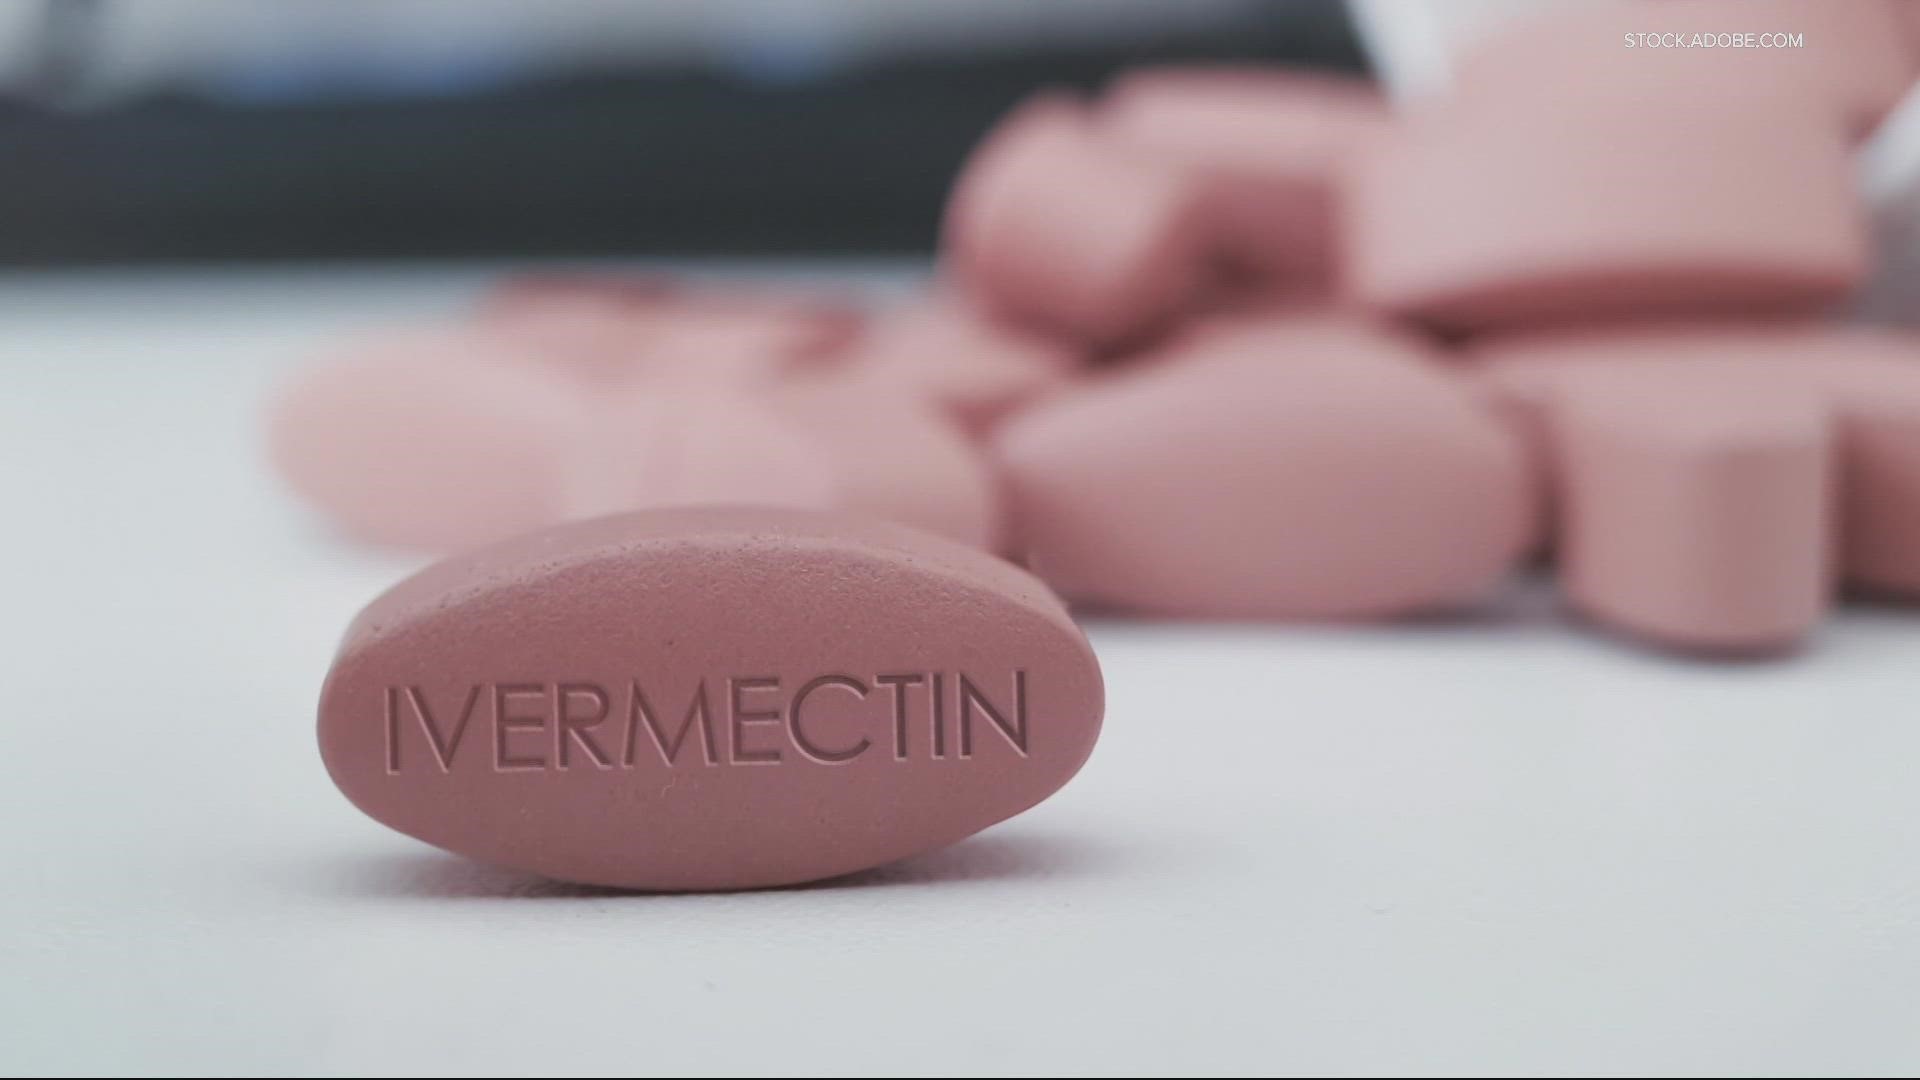 The FDA and Merck, the company that produces ivermectin, have said there is no scientific data that supports its use for the prevention or treatment of COVID-19.